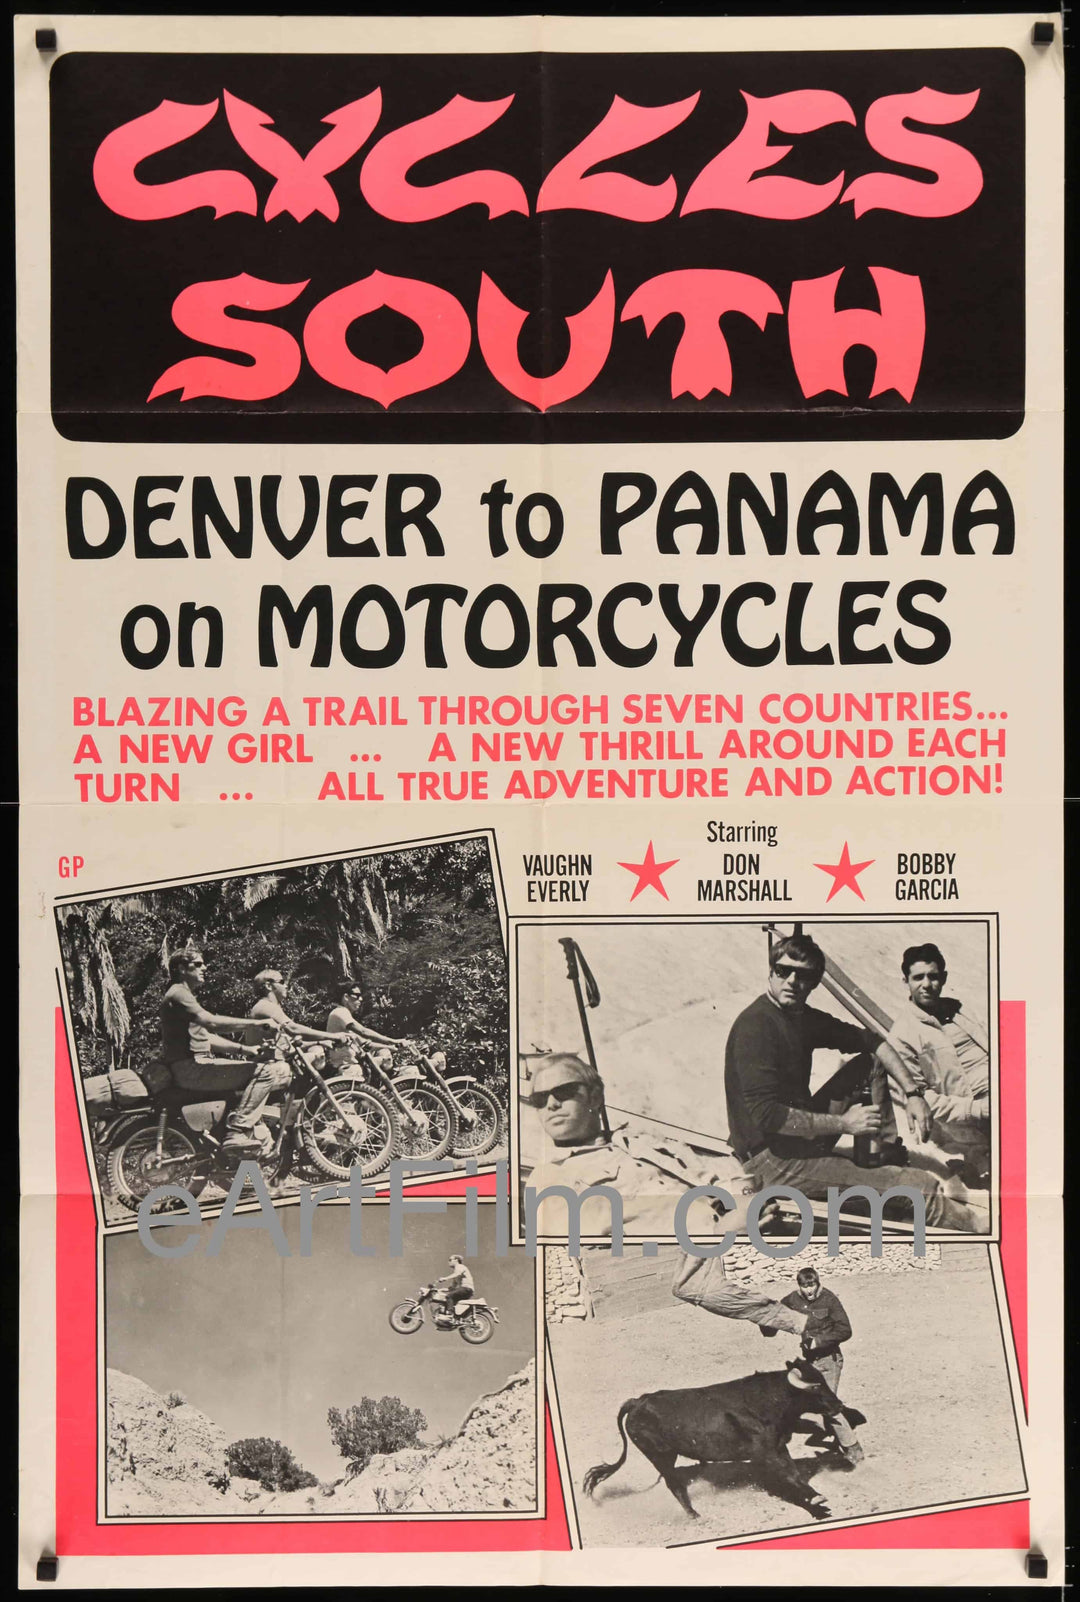 eArtFilm.com U.S One Sheet (28"x42")-Original-Vintage-Movie-Poster Cycles South-Don Marshall's biker action-thriller documentary-1971-28x42